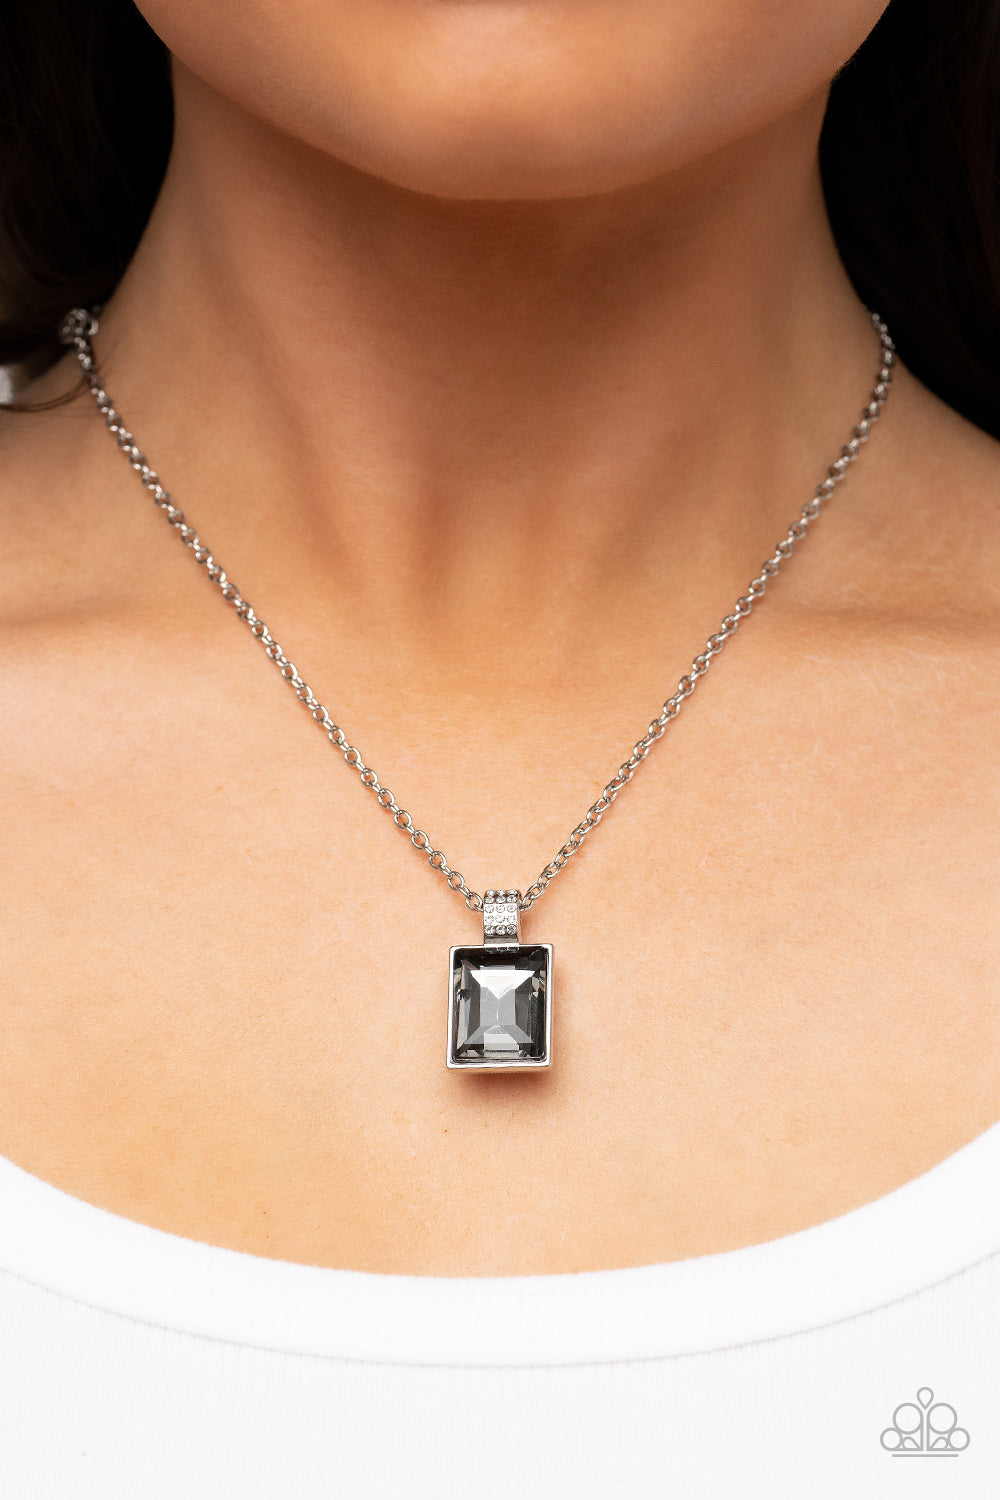 Paparazzi Understated Dazzle - Silver Necklace - A Finishing Touch Jewelry